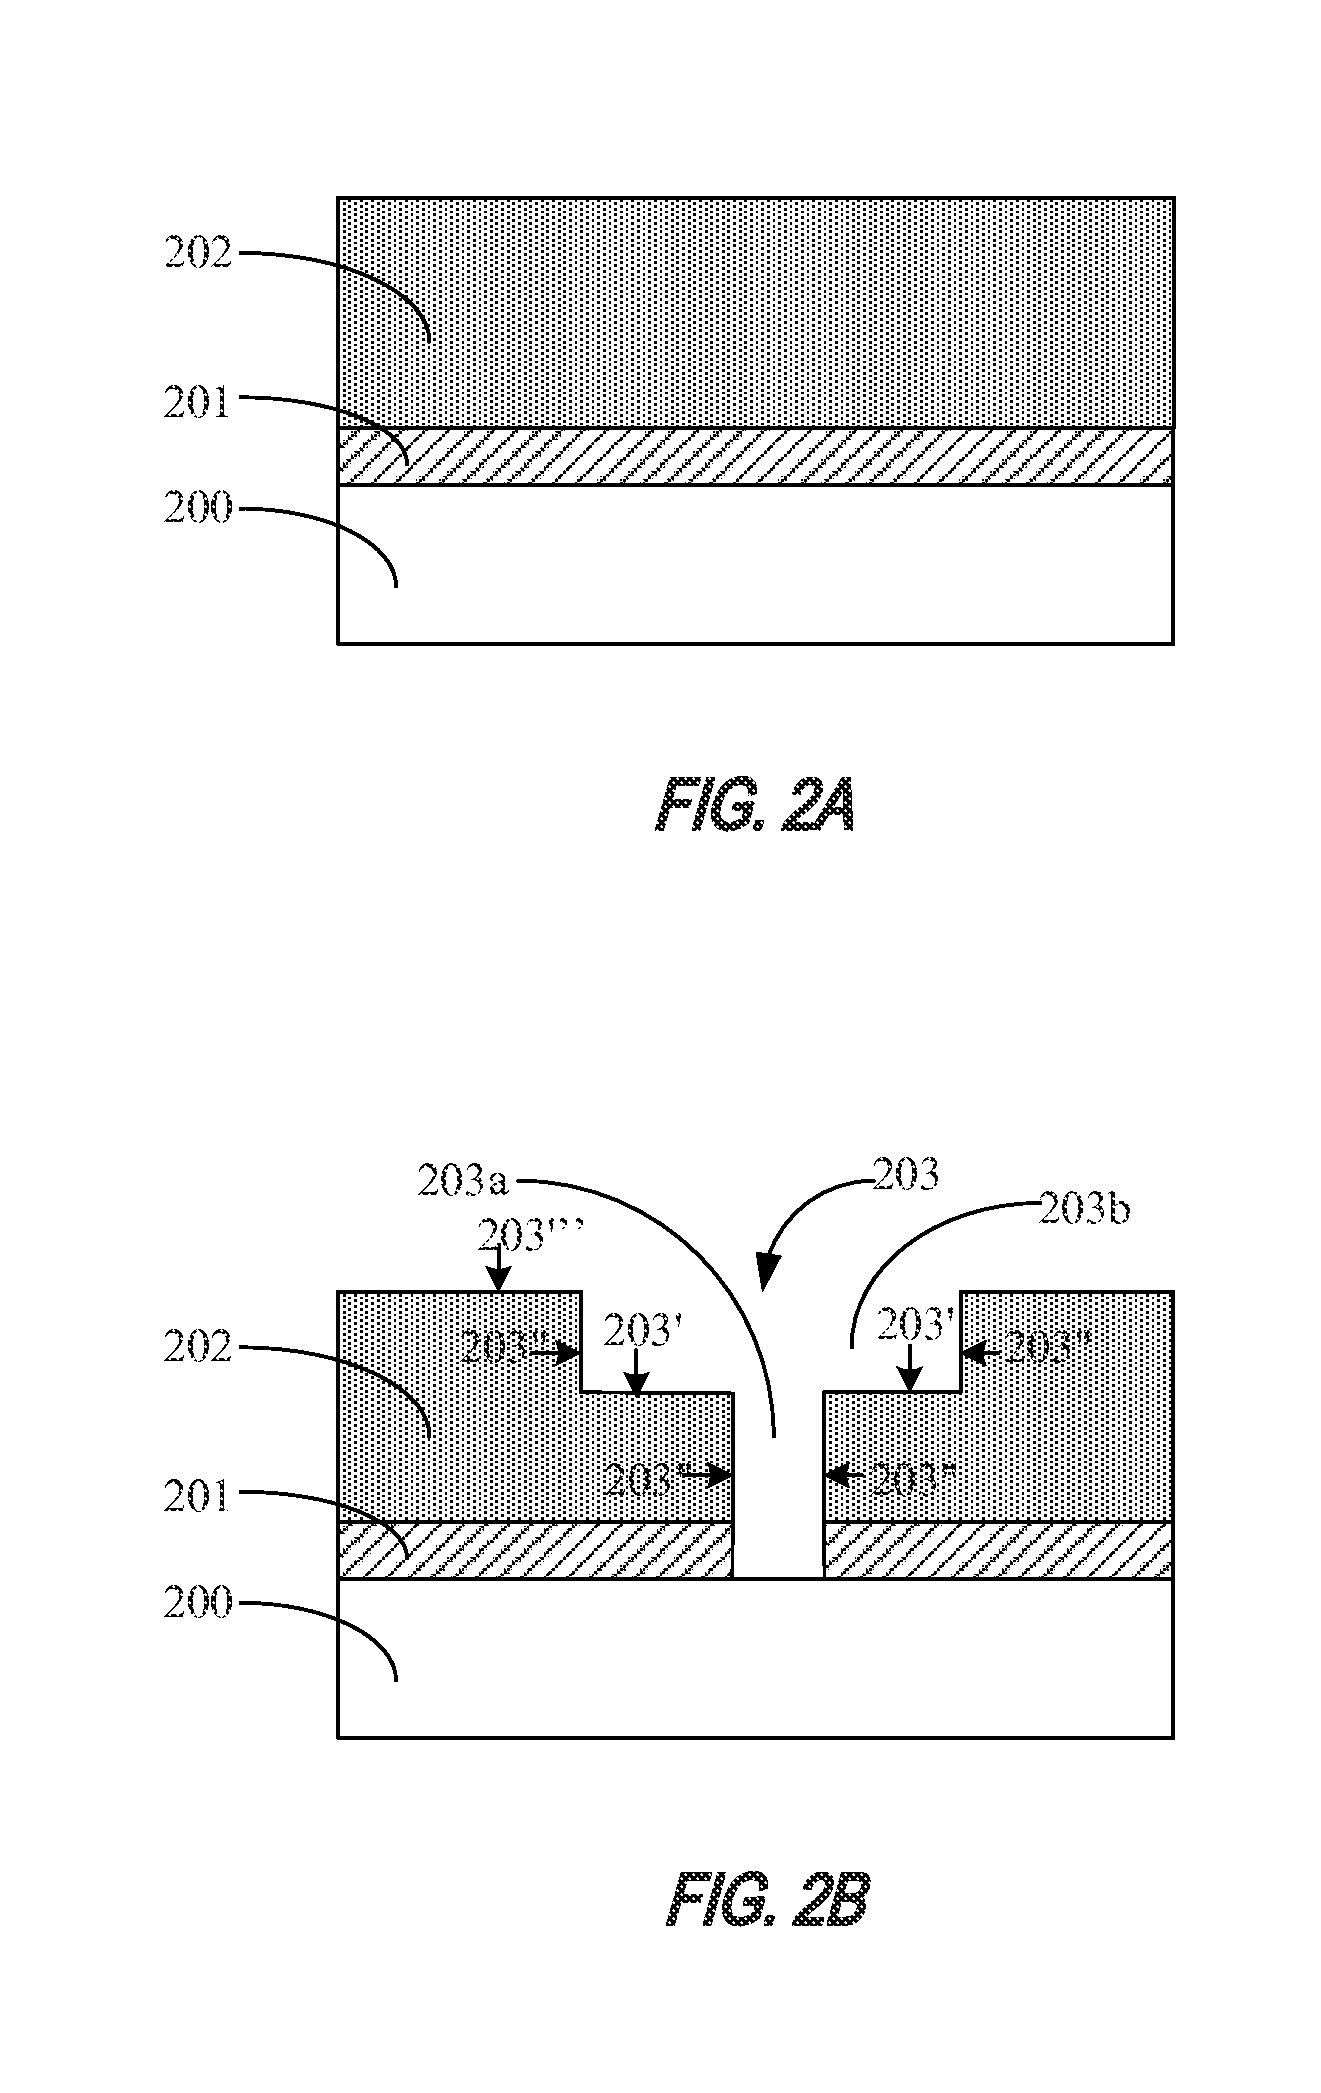 Method for improving adhesion between porous low k dielectric and barrier layer